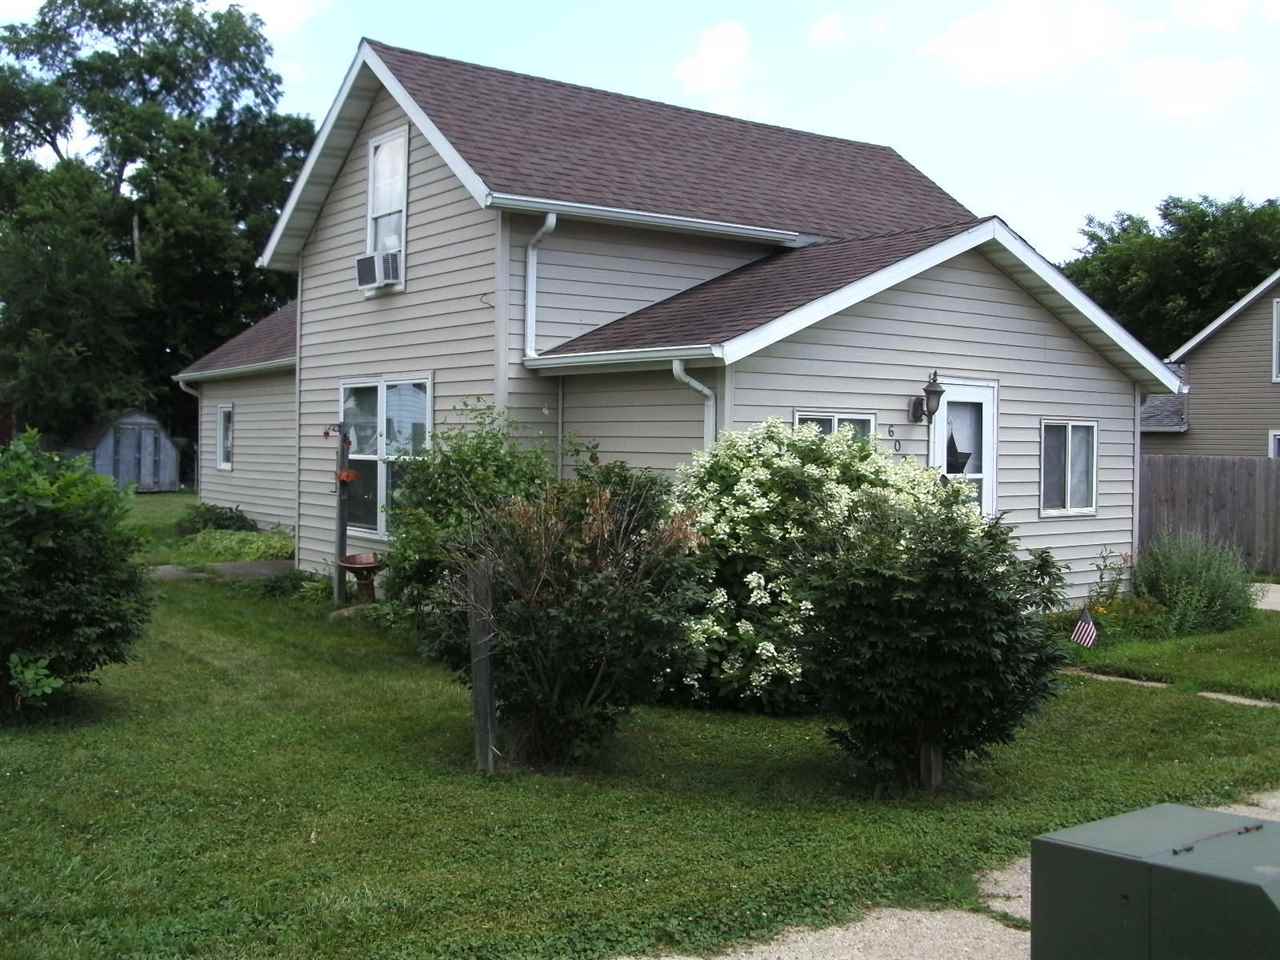 602 S 9th St, Estherville, IA 51334 